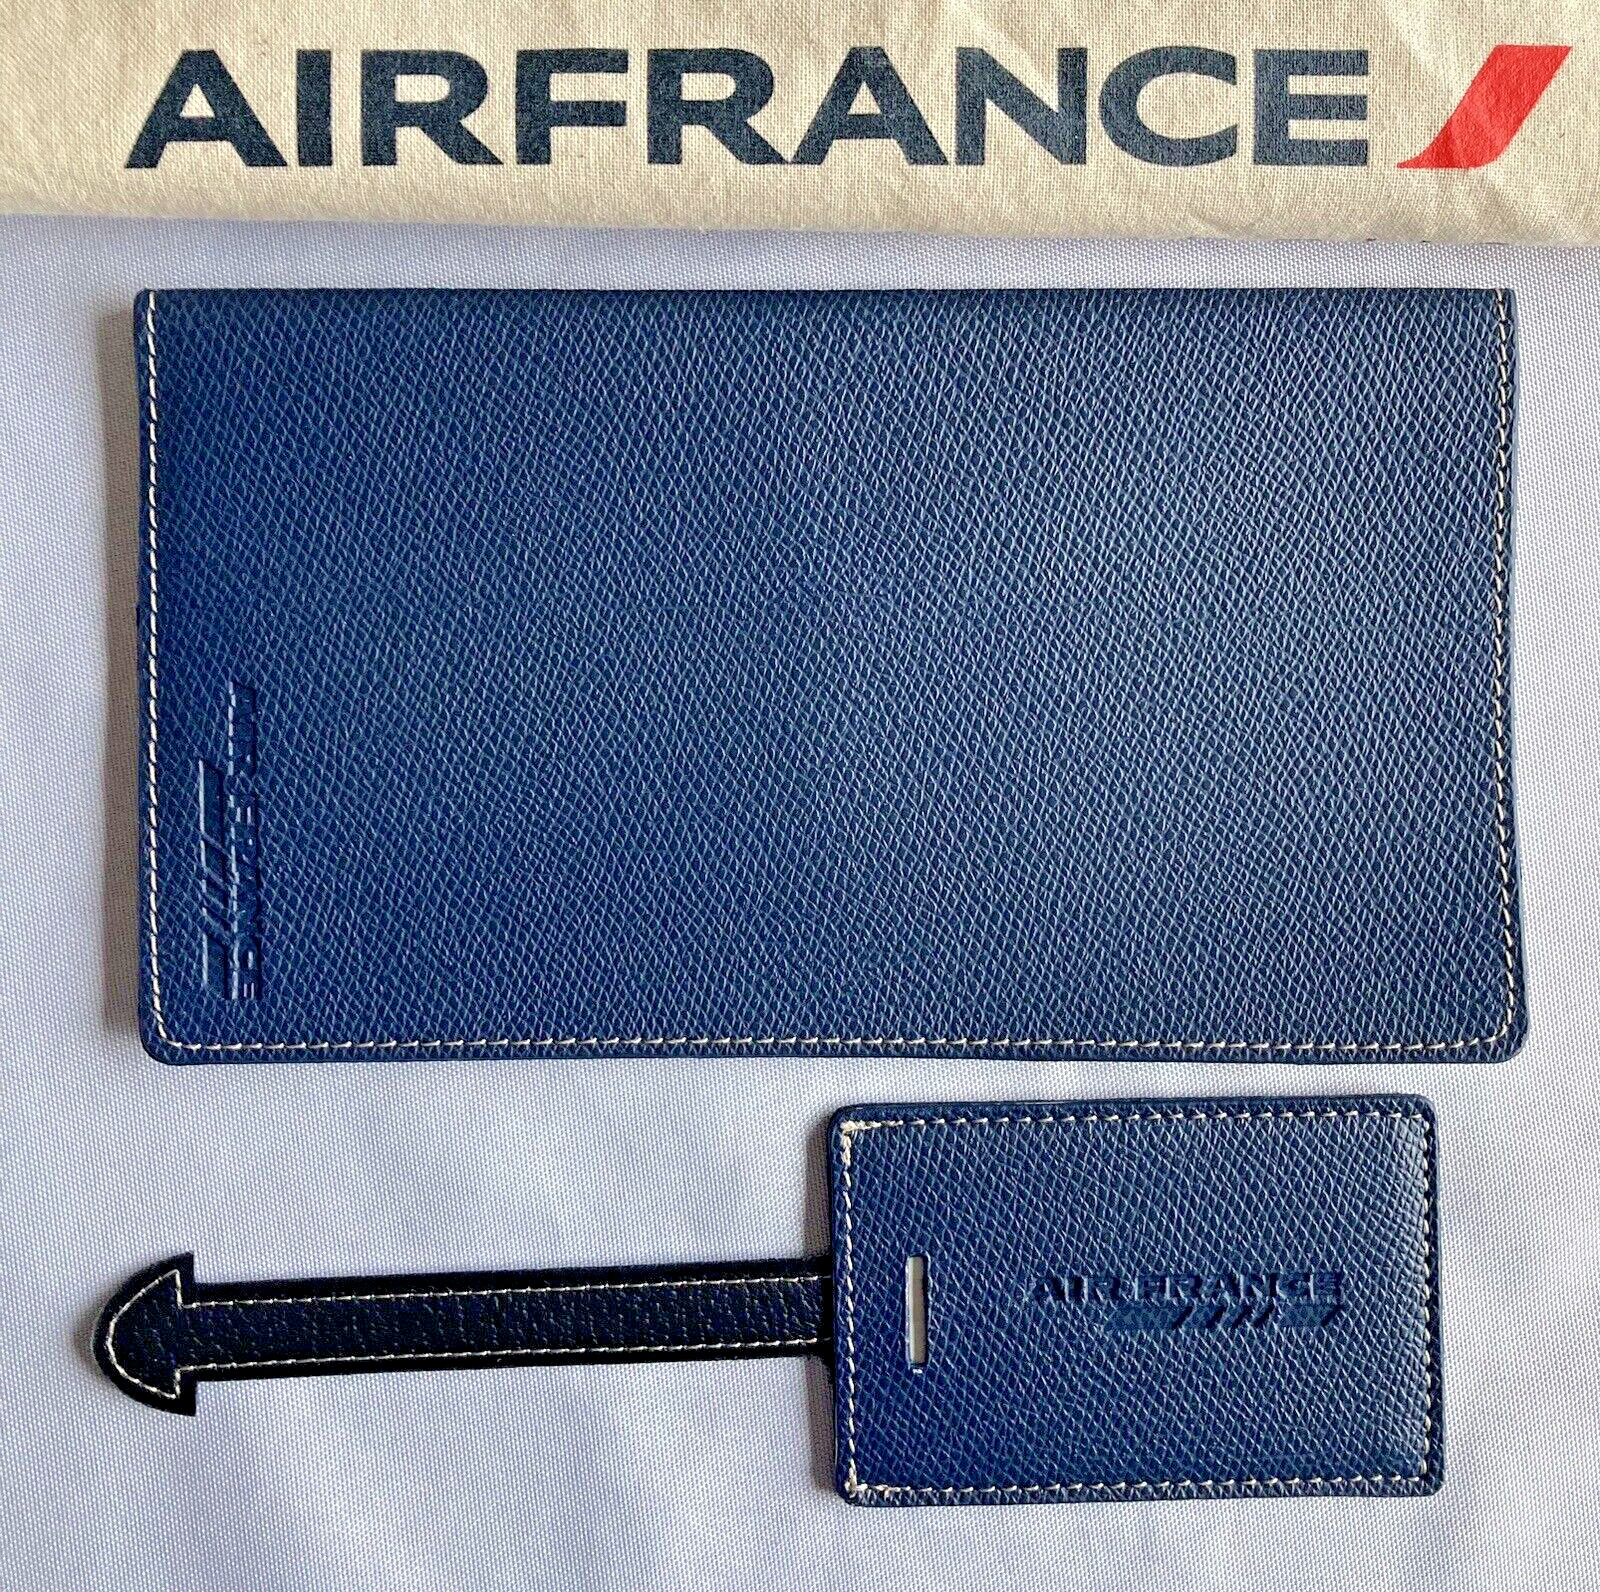 AIR FRANCE AIRPLANE LUGGAGE TAG and TICKET/PASSPORT HOLDER